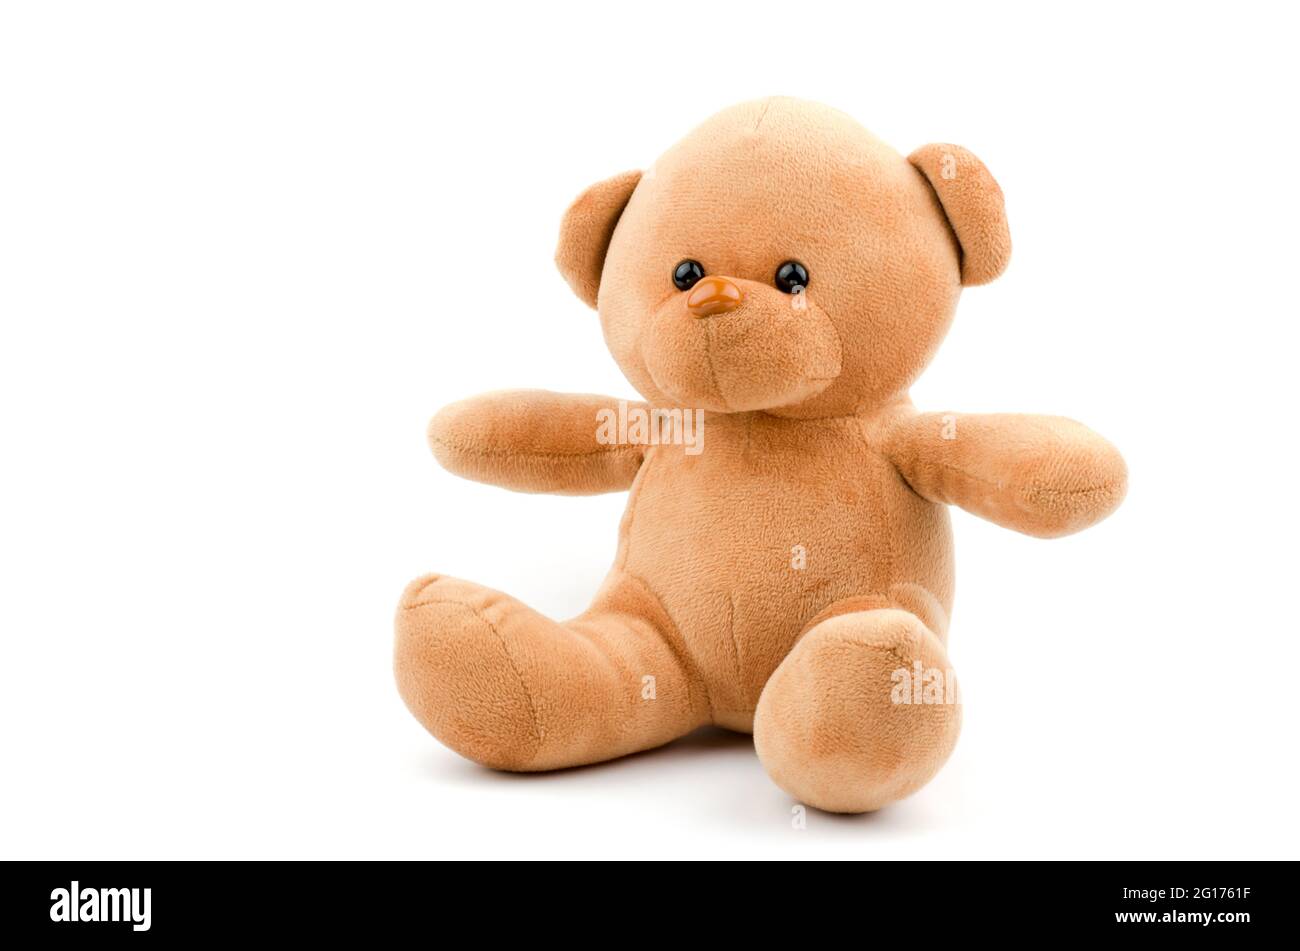 Brown teddy bear on a white background, isolate. Children's soft toy Stock Photo